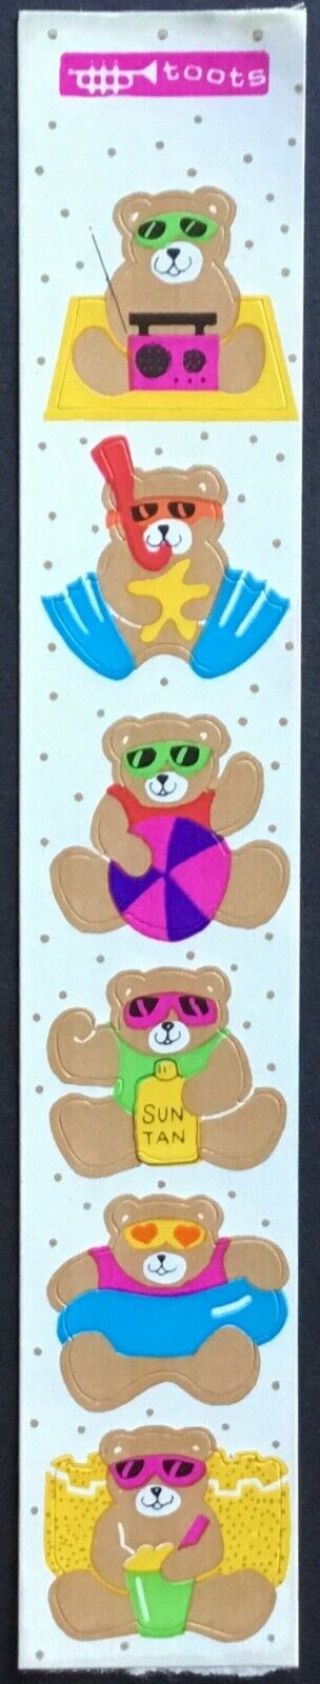 Vintage Stickers - Cardesign - Toots - Beach Bears - Dated 1983